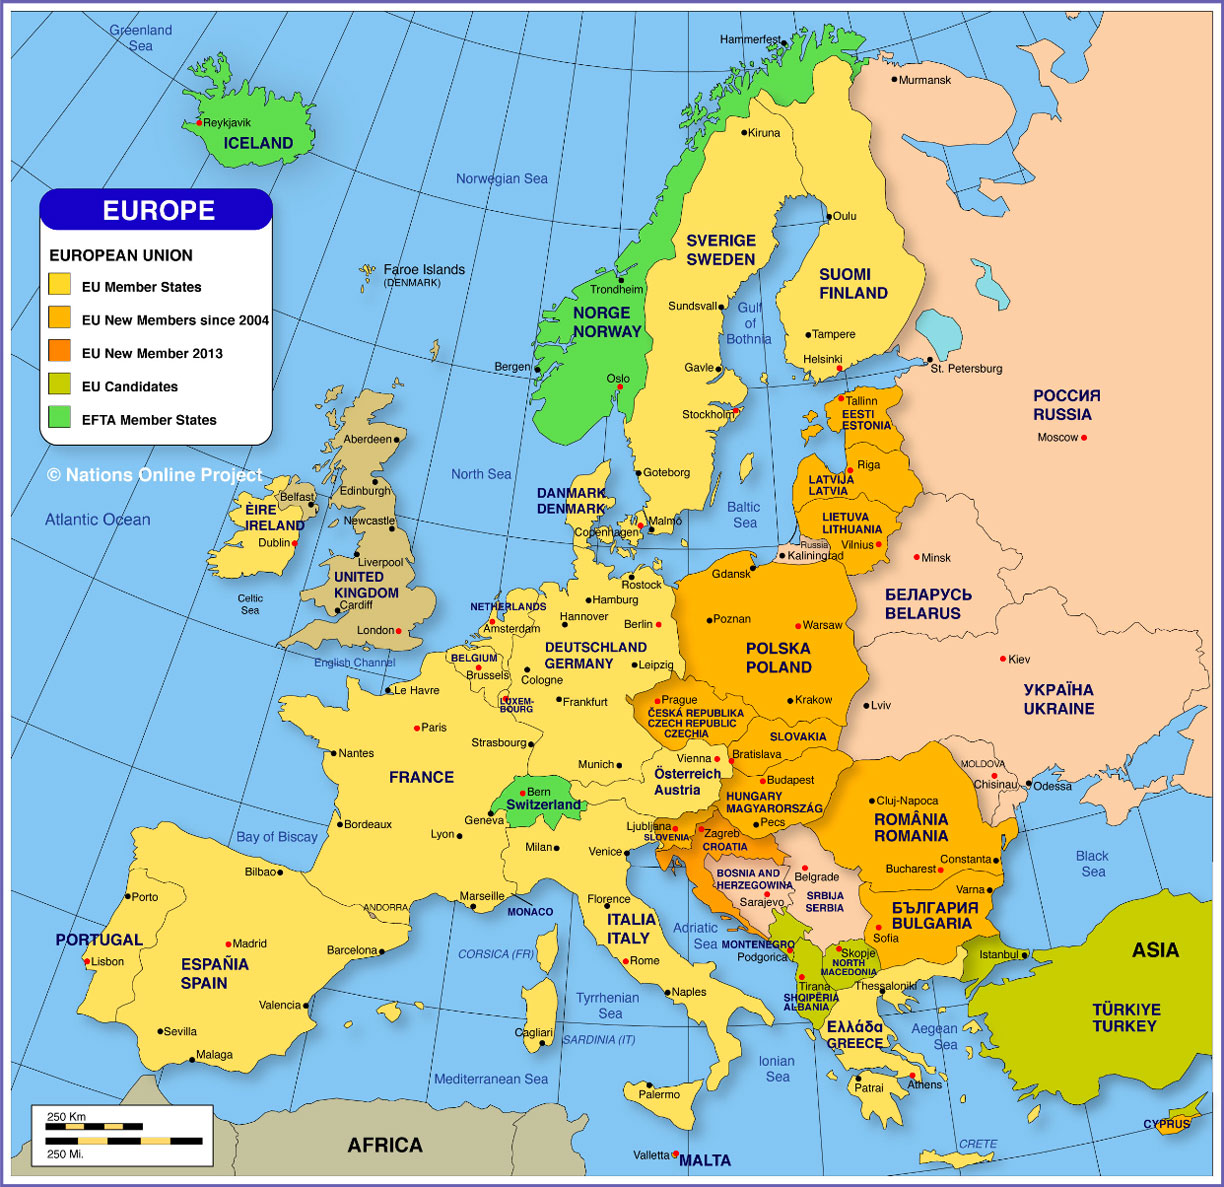 the world according to europeans